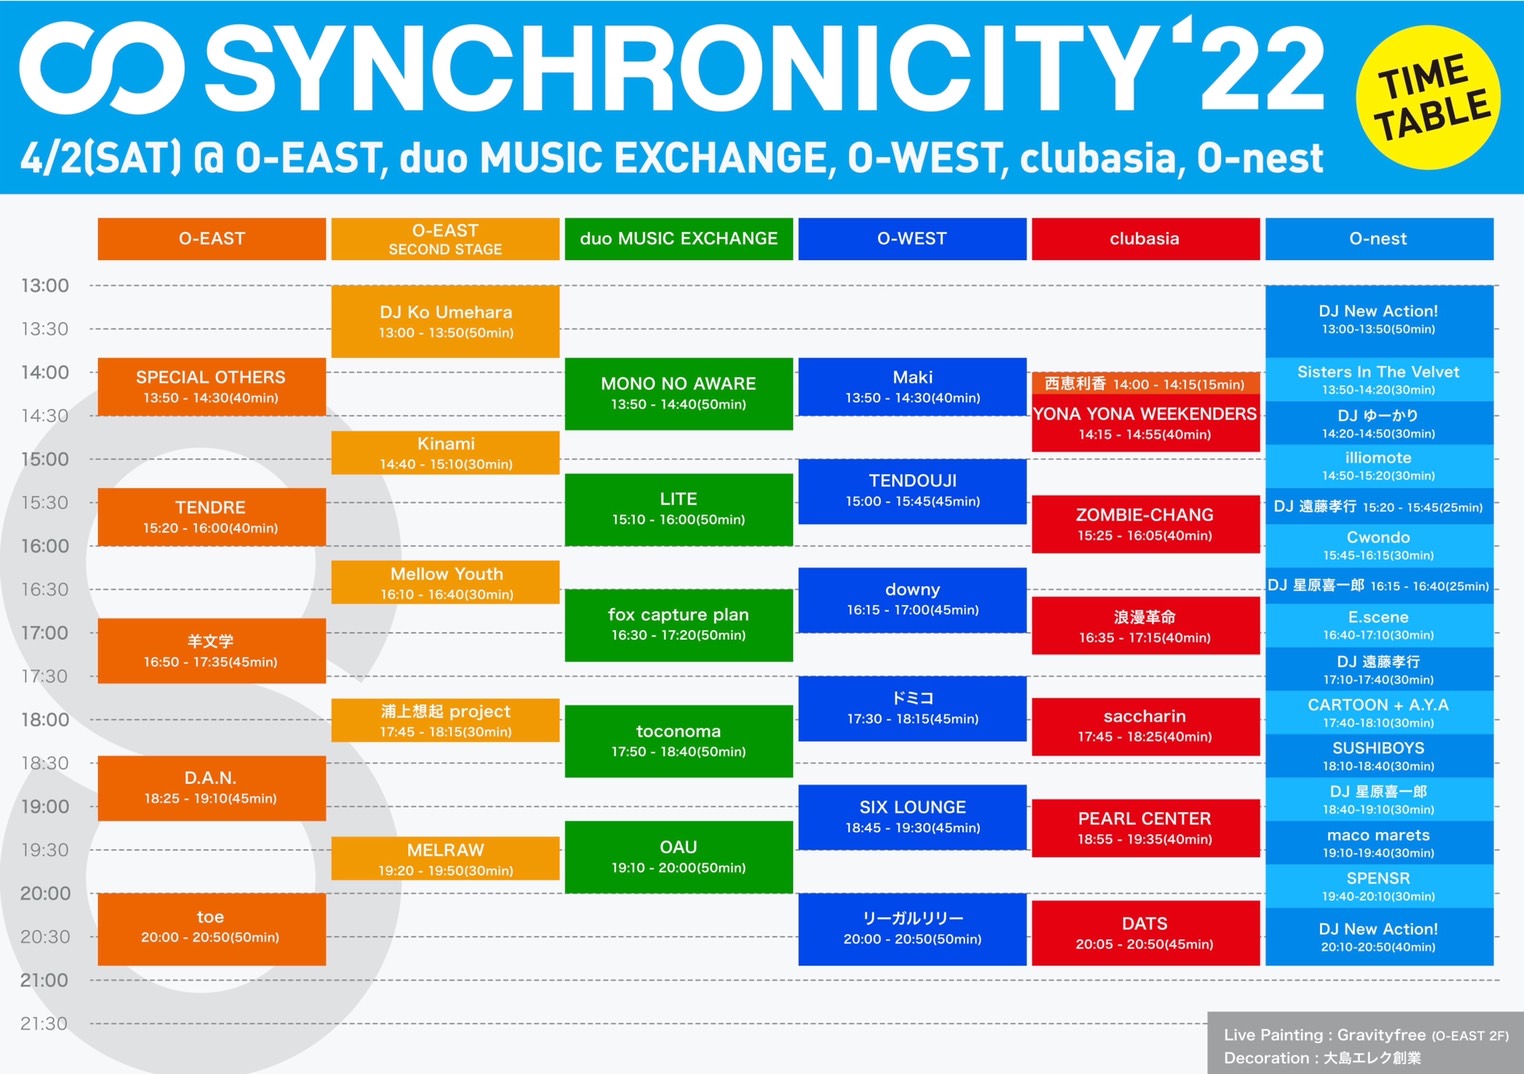 SYNCHRONICITY’22 TIMETABLE 4/2(SAT)